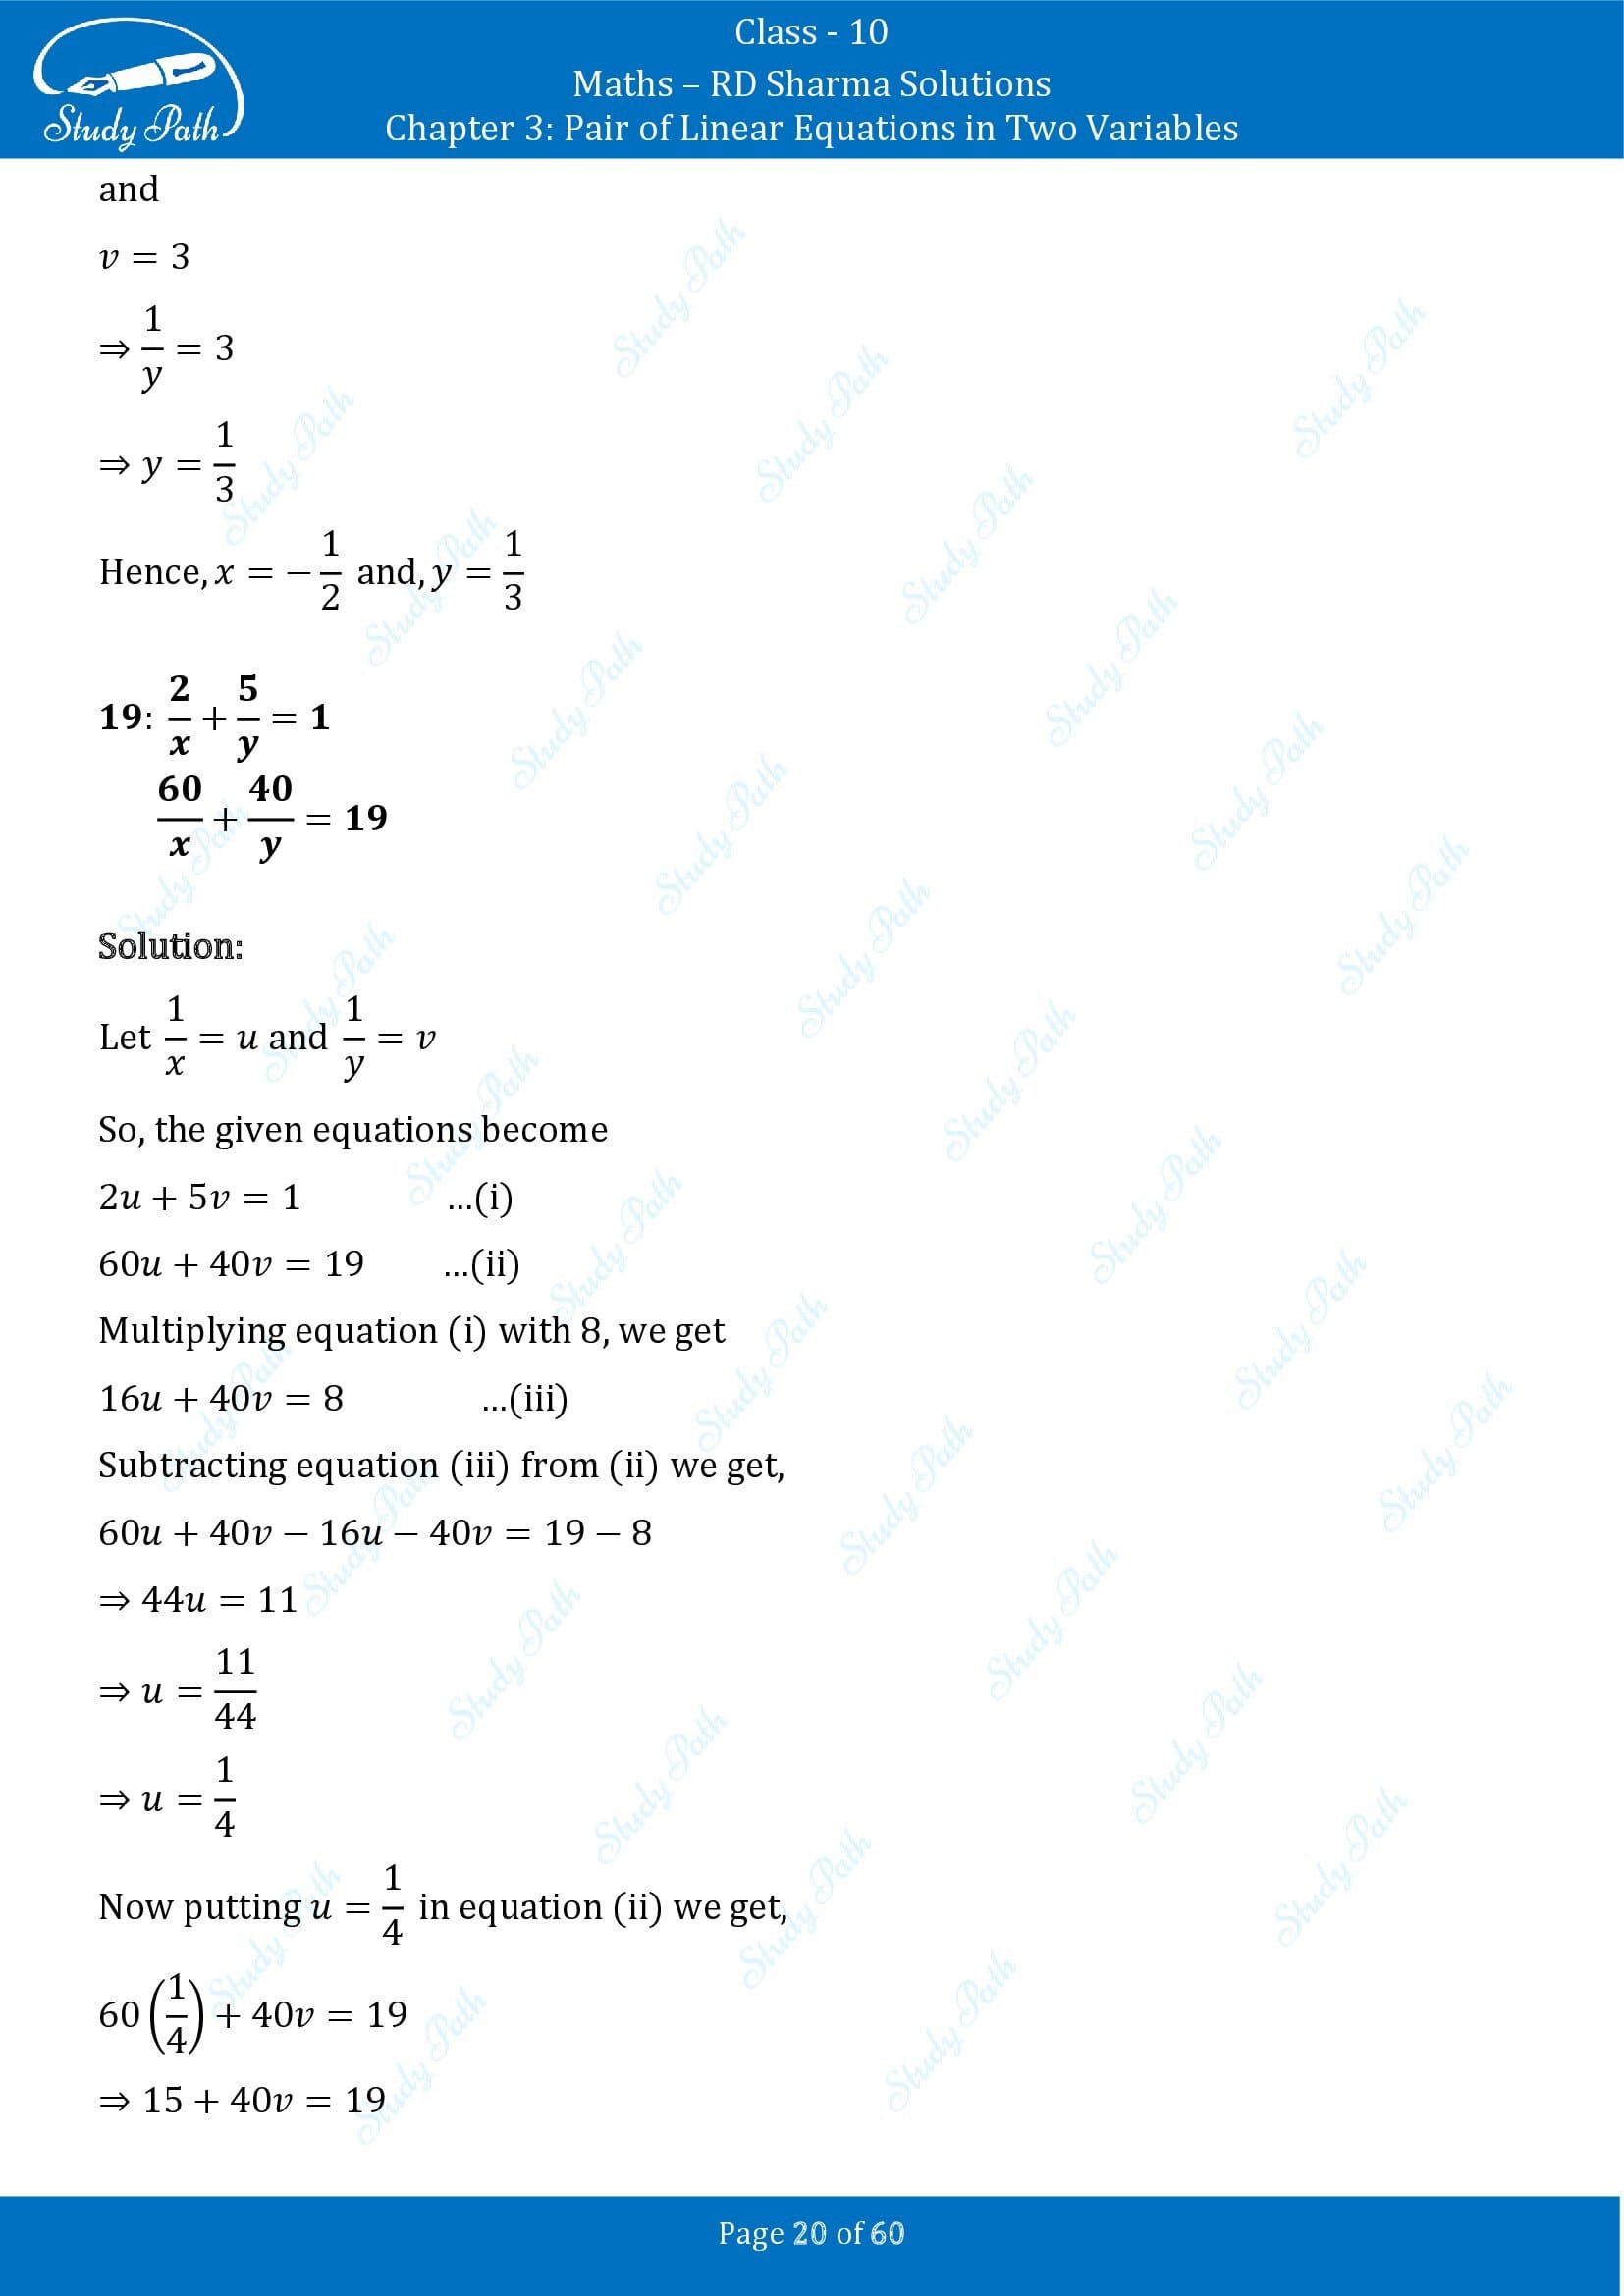 RD Sharma Solutions Class 10 Chapter 3 Pair of Linear Equations in Two Variables Exercise 3.3 00020